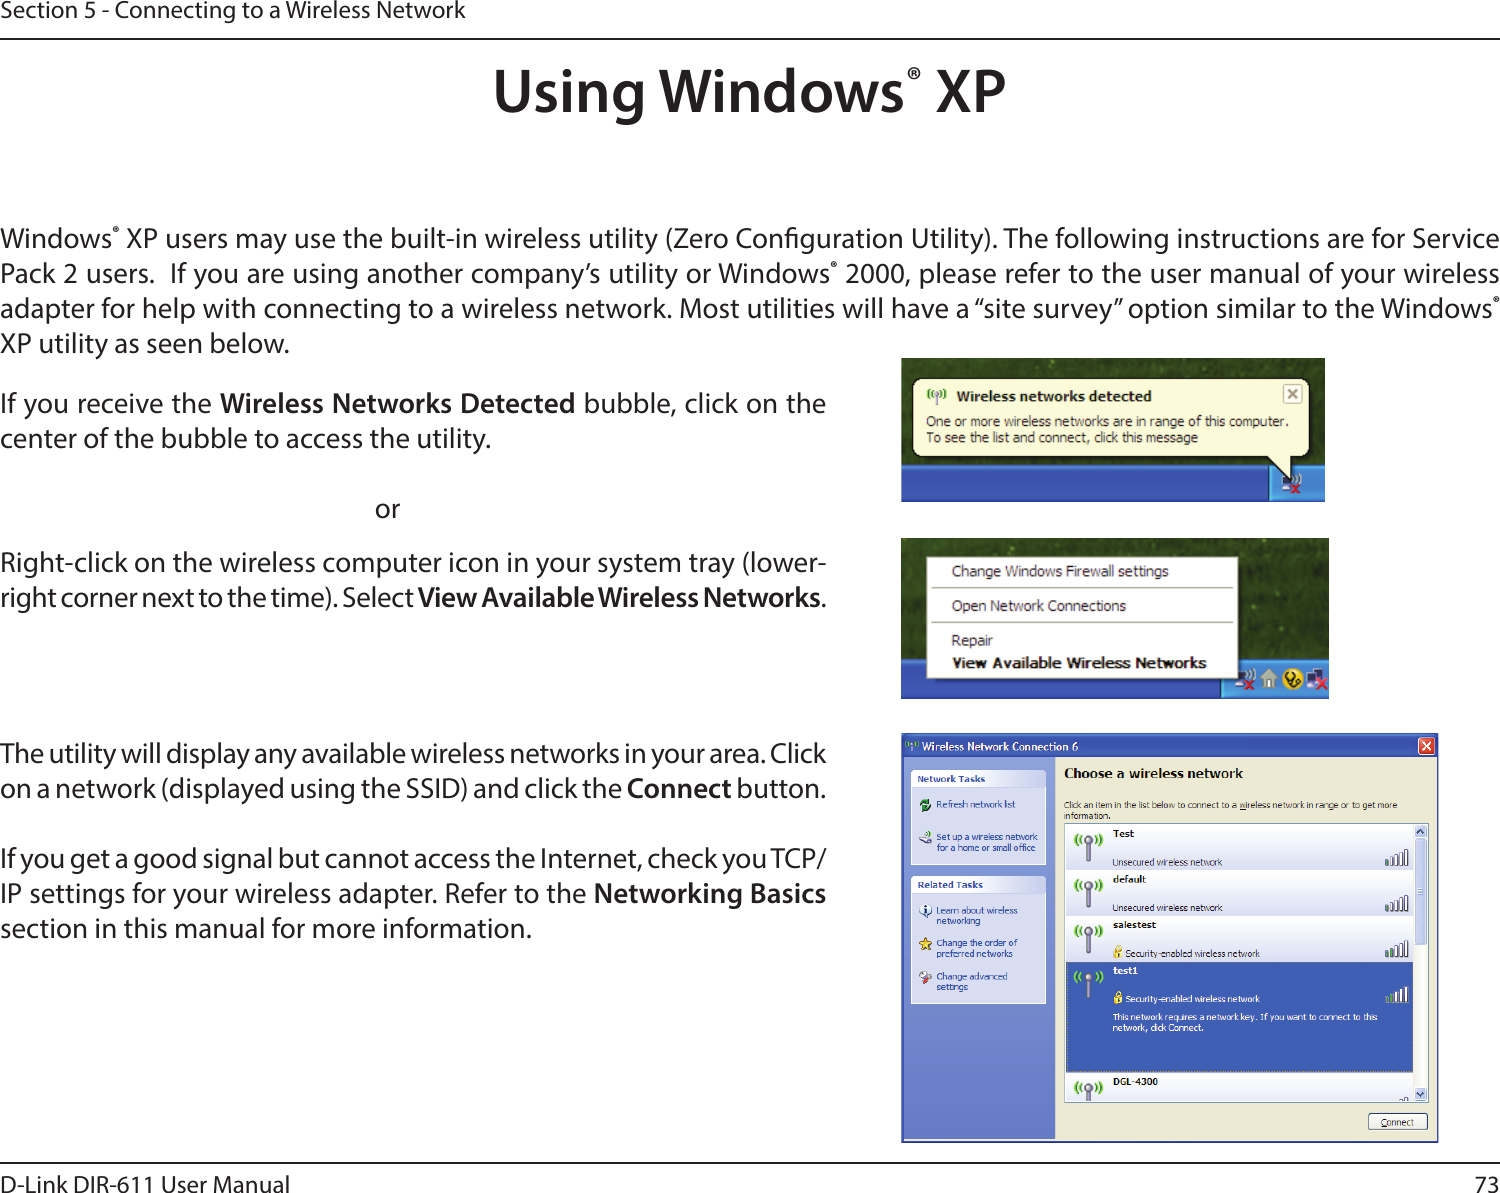 73D-Link DIR-611 User ManualSection 5 - Connecting to a Wireless NetworkUsing Windows® XPWindows® XP users may use the built-in wireless utility (Zero Conguration Utility). The following instructions are for Service Pack 2 users.  If you are using another company’s utility or Windows® 2000, please refer to the user manual of your wireless adapter for help with connecting to a wireless network. Most utilities will have a “site survey” option similar to the Windows® XP utility as seen below.Right-click on the wireless computer icon in your system tray (lower-right corner next to the time). Select View Available Wireless Networks.If you receive the Wireless Networks Detected bubble, click on the center of the bubble to access the utility.     orThe utility will display any available wireless networks in your area. Click on a network (displayed using the SSID) and click the Connect button.If you get a good signal but cannot access the Internet, check you TCP/IP settings for your wireless adapter. Refer to the Networking Basics section in this manual for more information.